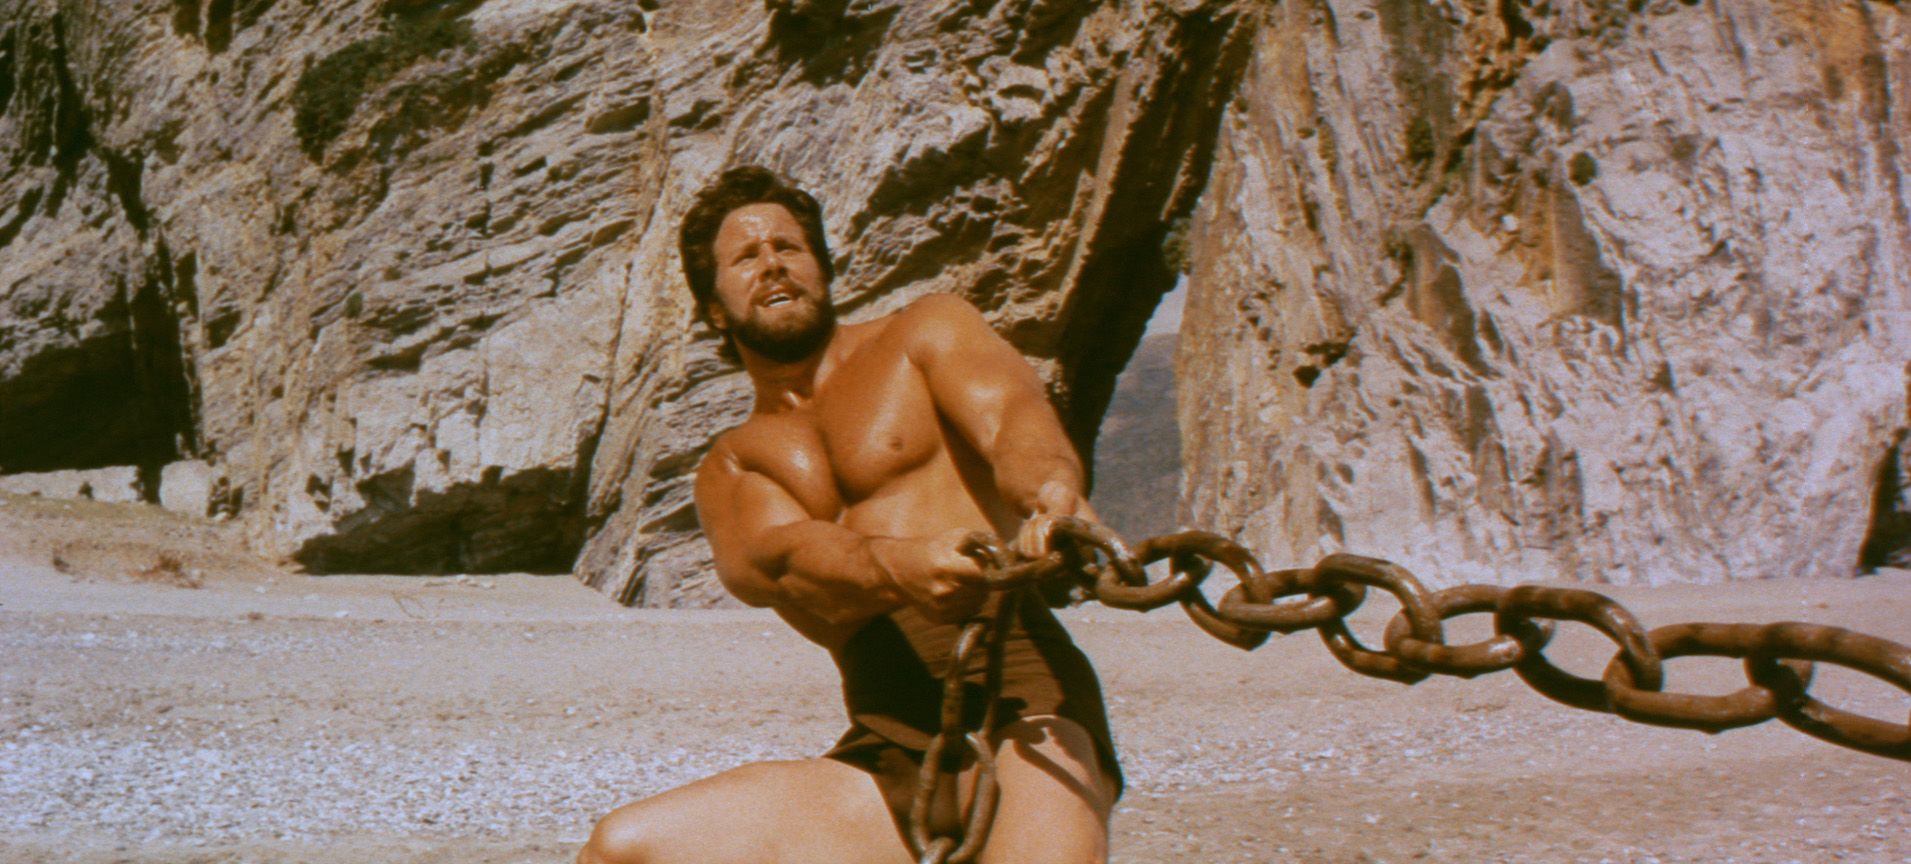 Hercules and the Captive Women Pulls You Into a Sword-and-Sandals World -  Zombies in My Blog